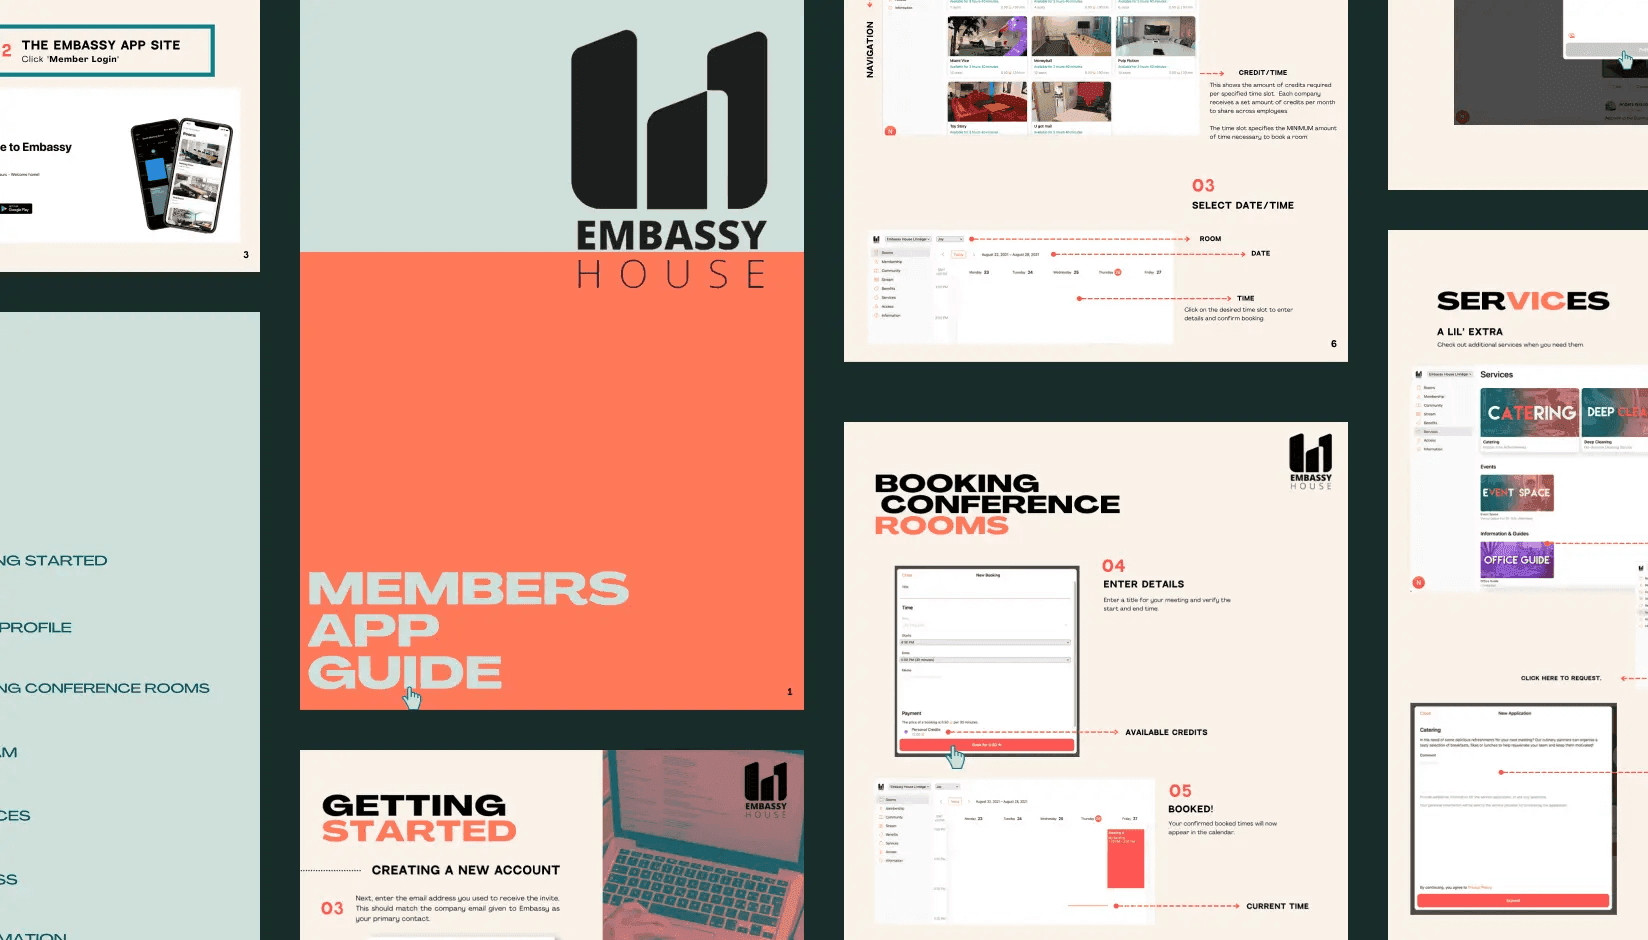 Members App Guide created by Embassy House coworking space